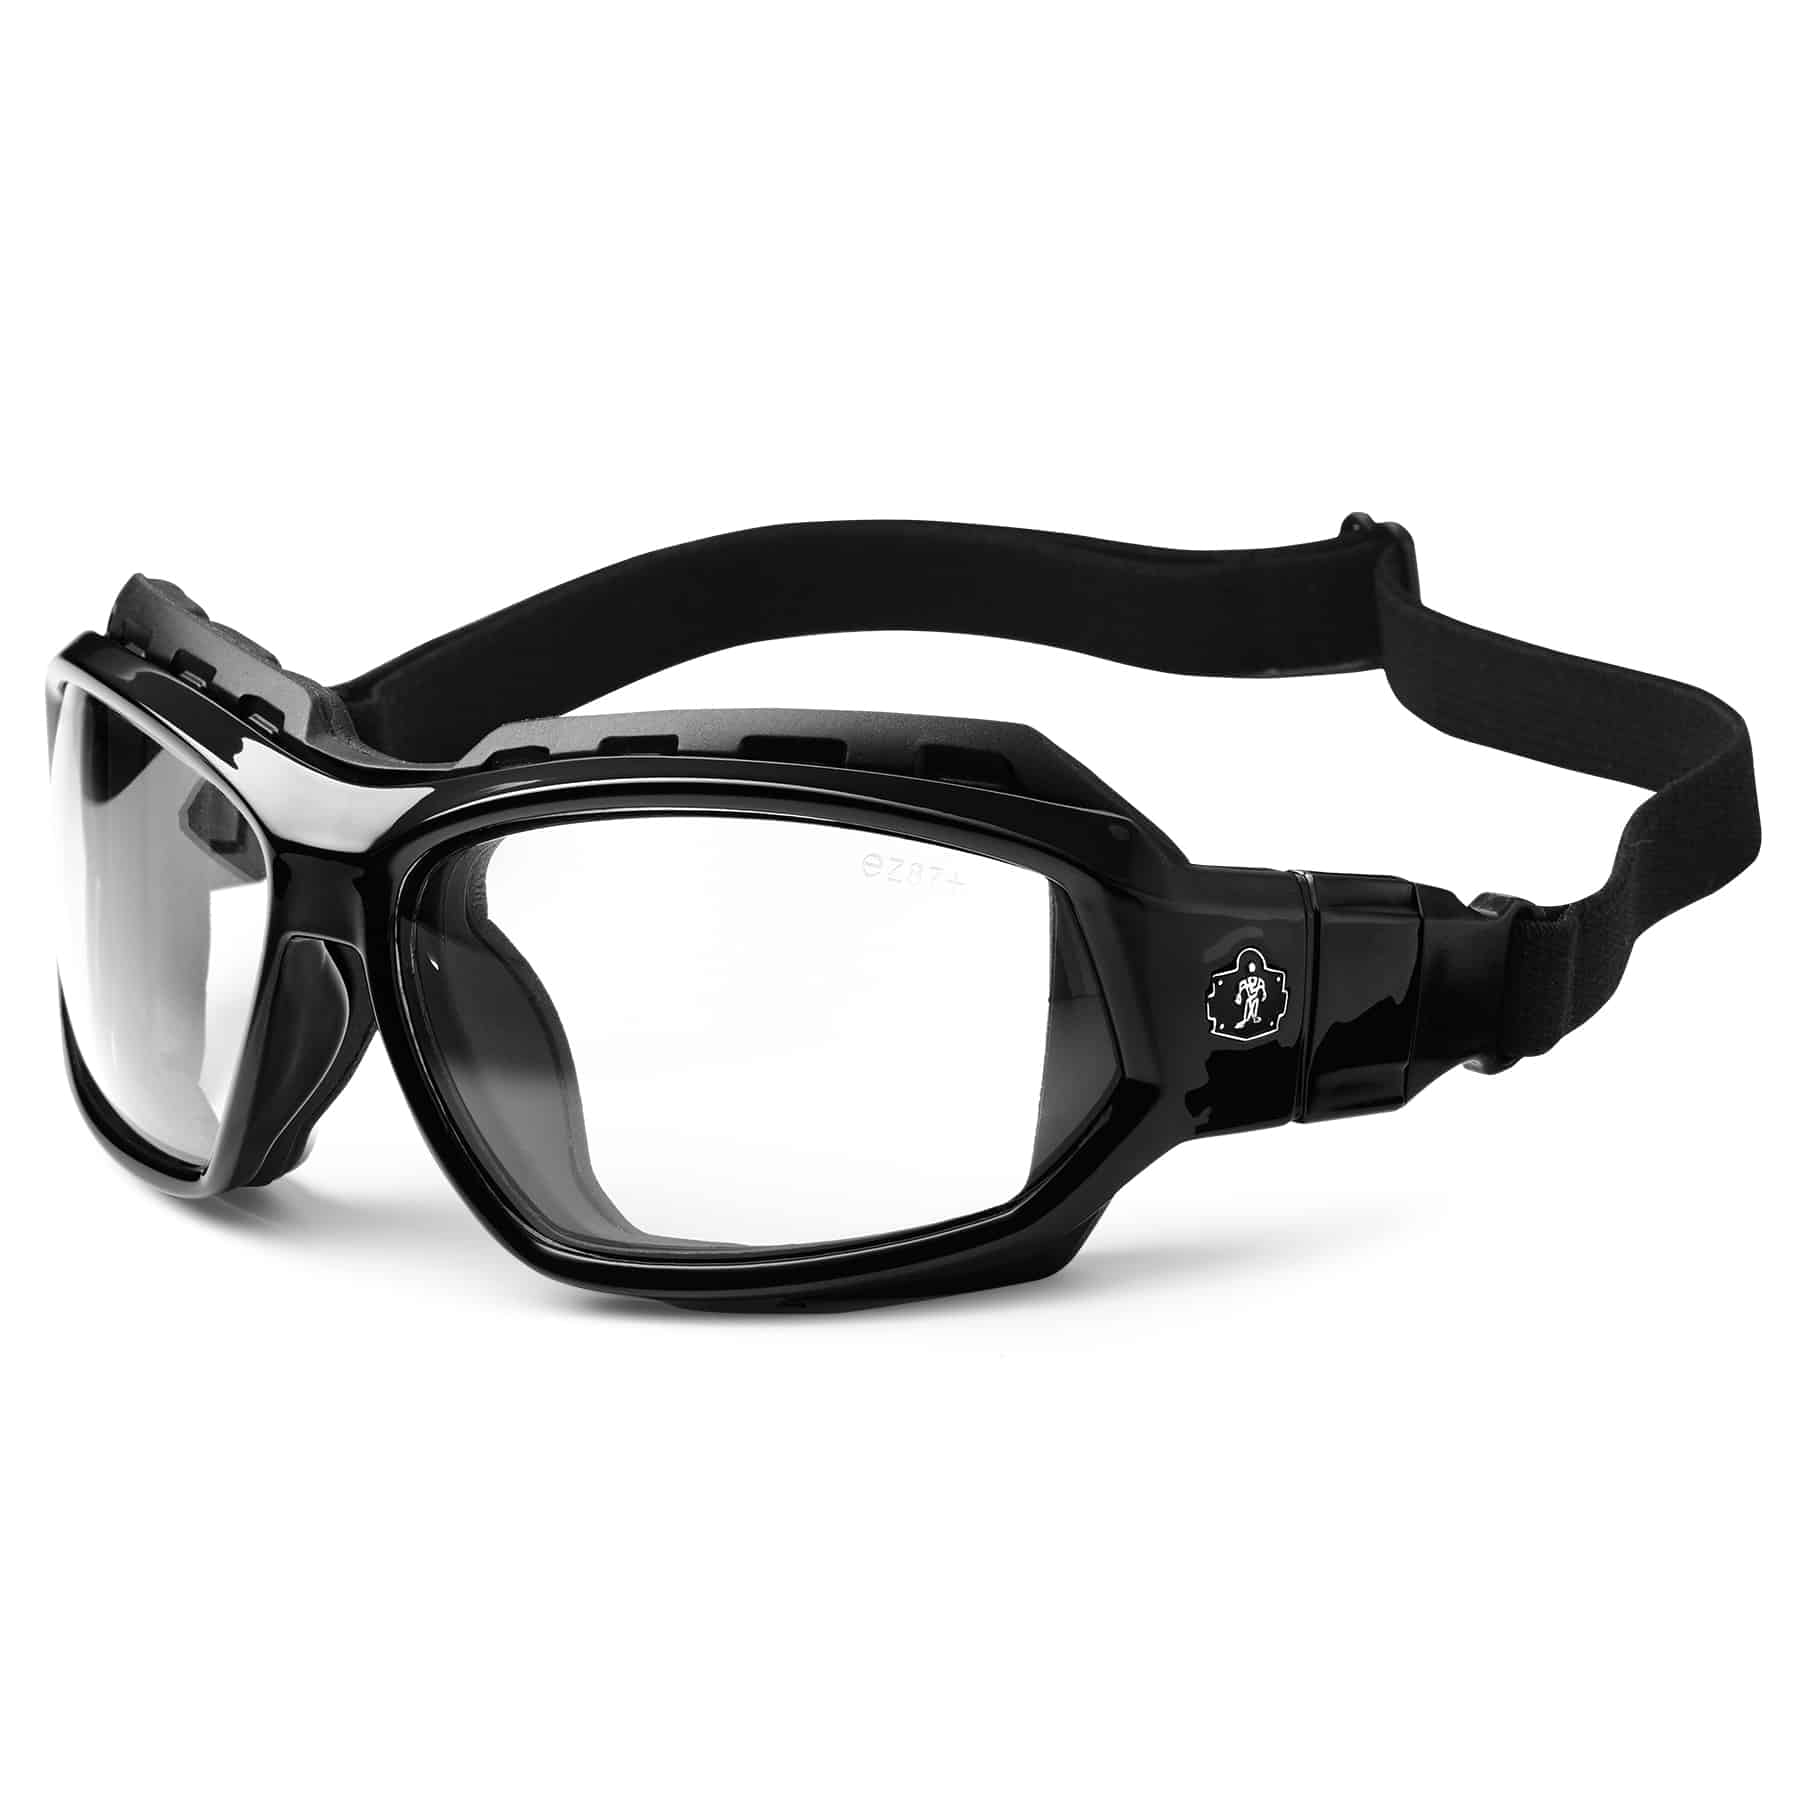 Motorcycle Goggles That Fit Over Glasses w/ Strap YellowClear Dark Grey Lens 